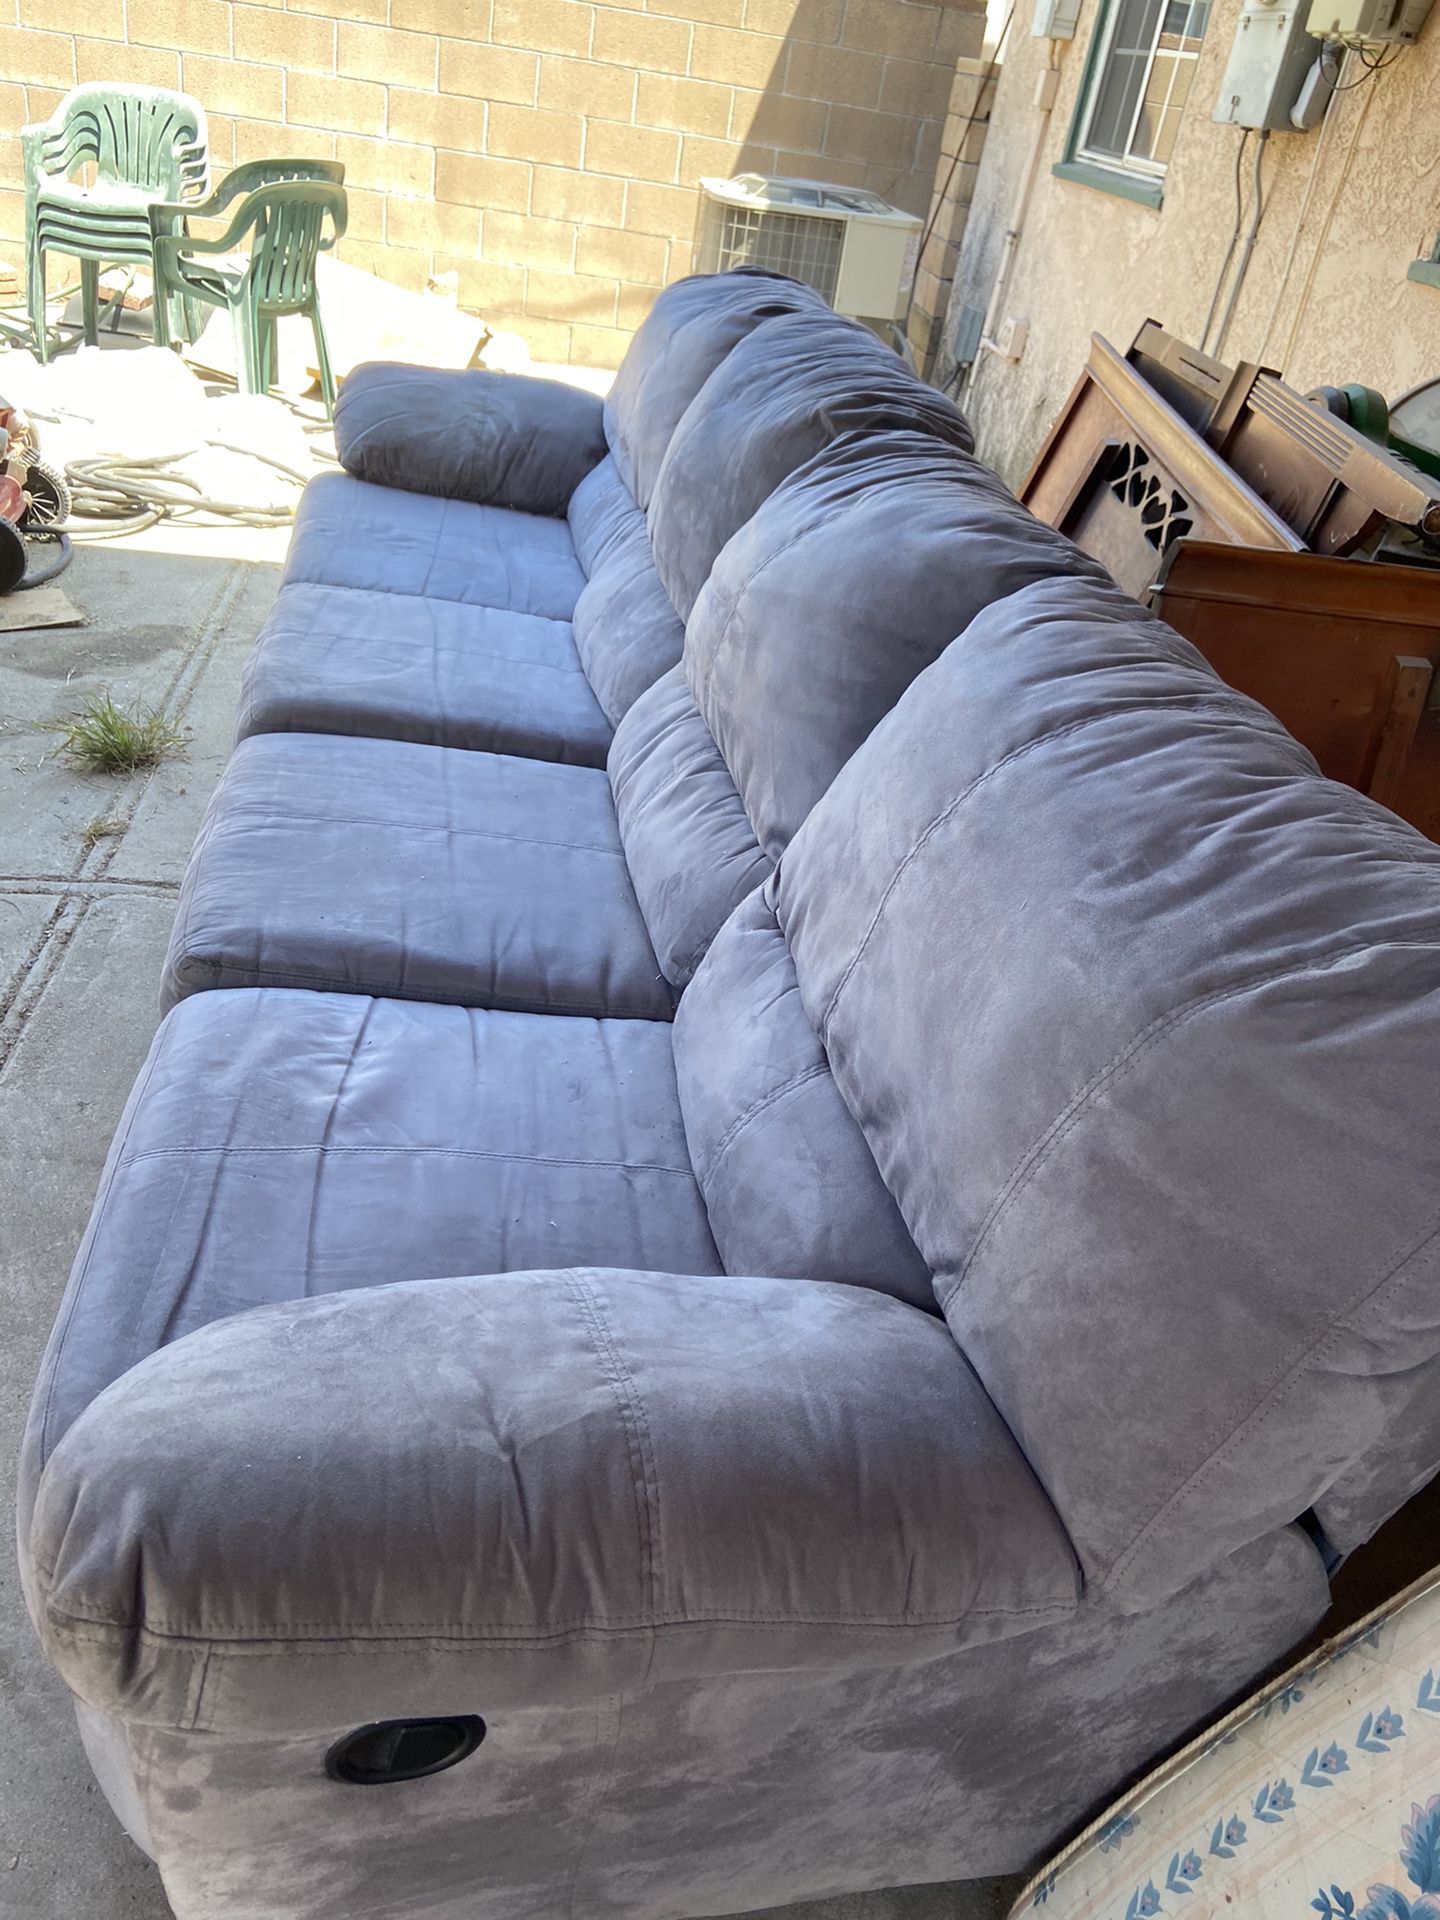 Large sofa soft and recliners